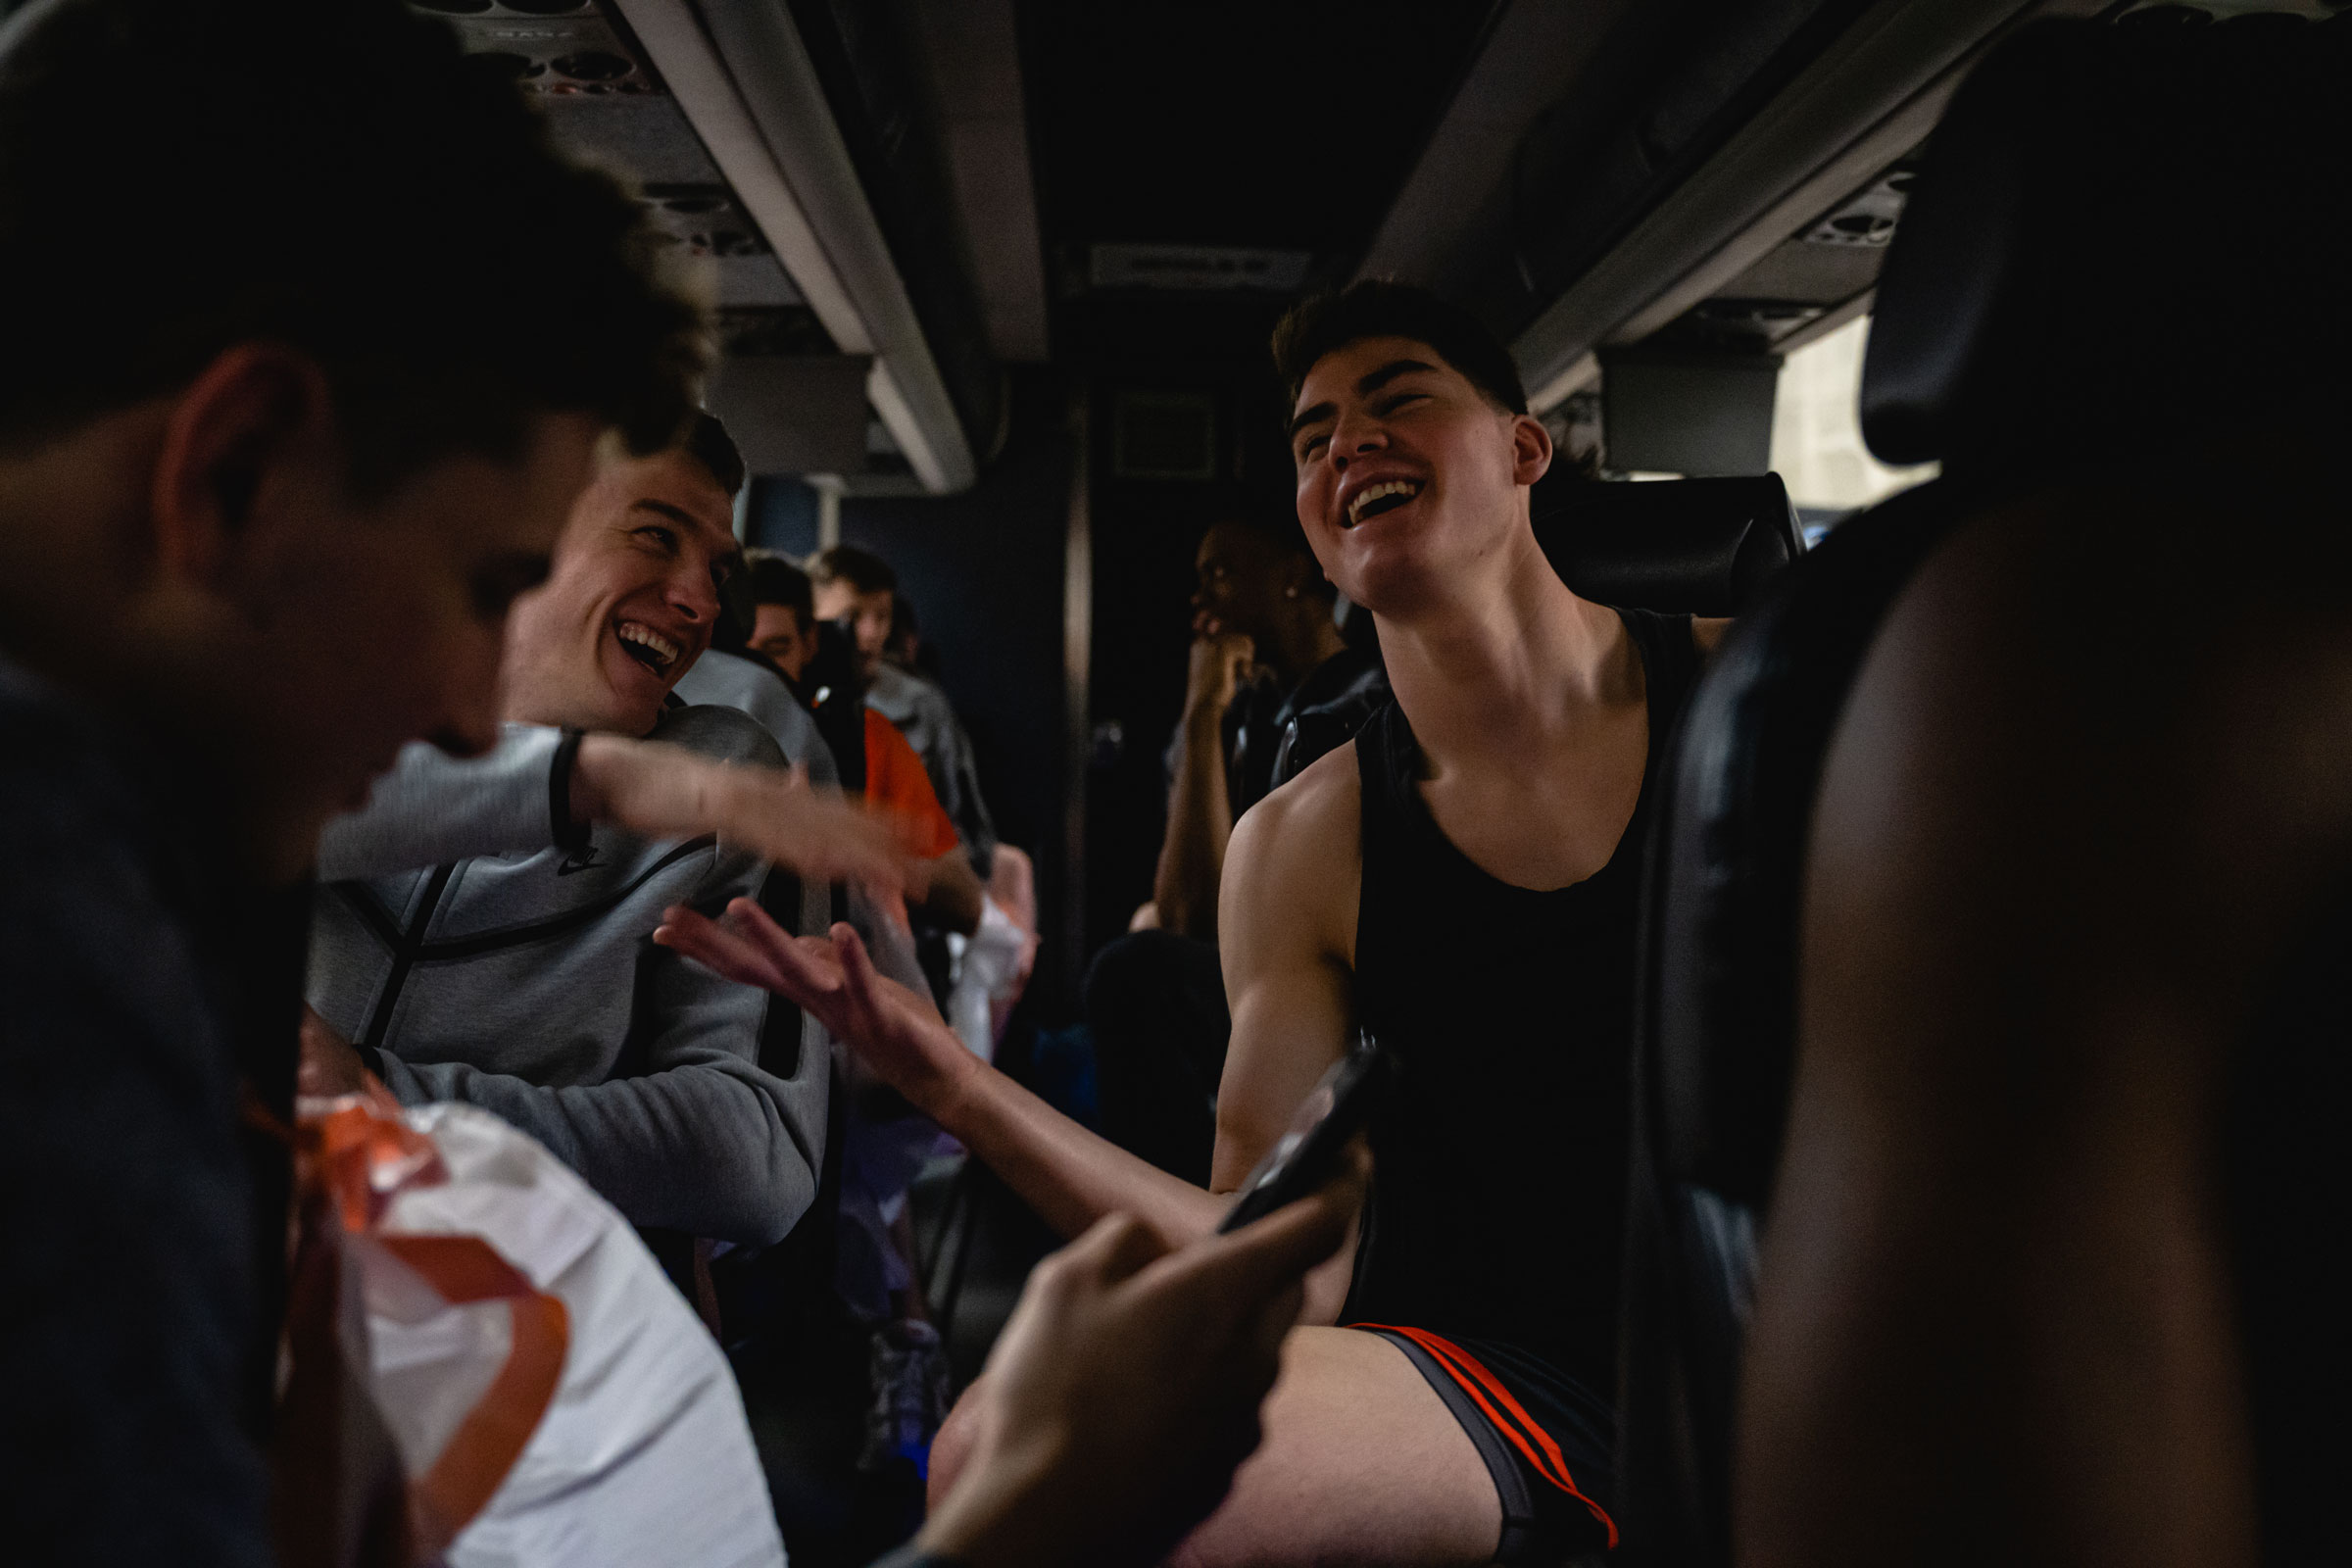 Blake Peters (L) and Jack Scott (R) laugh on the team bus on their way to the arena. (Jon Cherry for TIME)